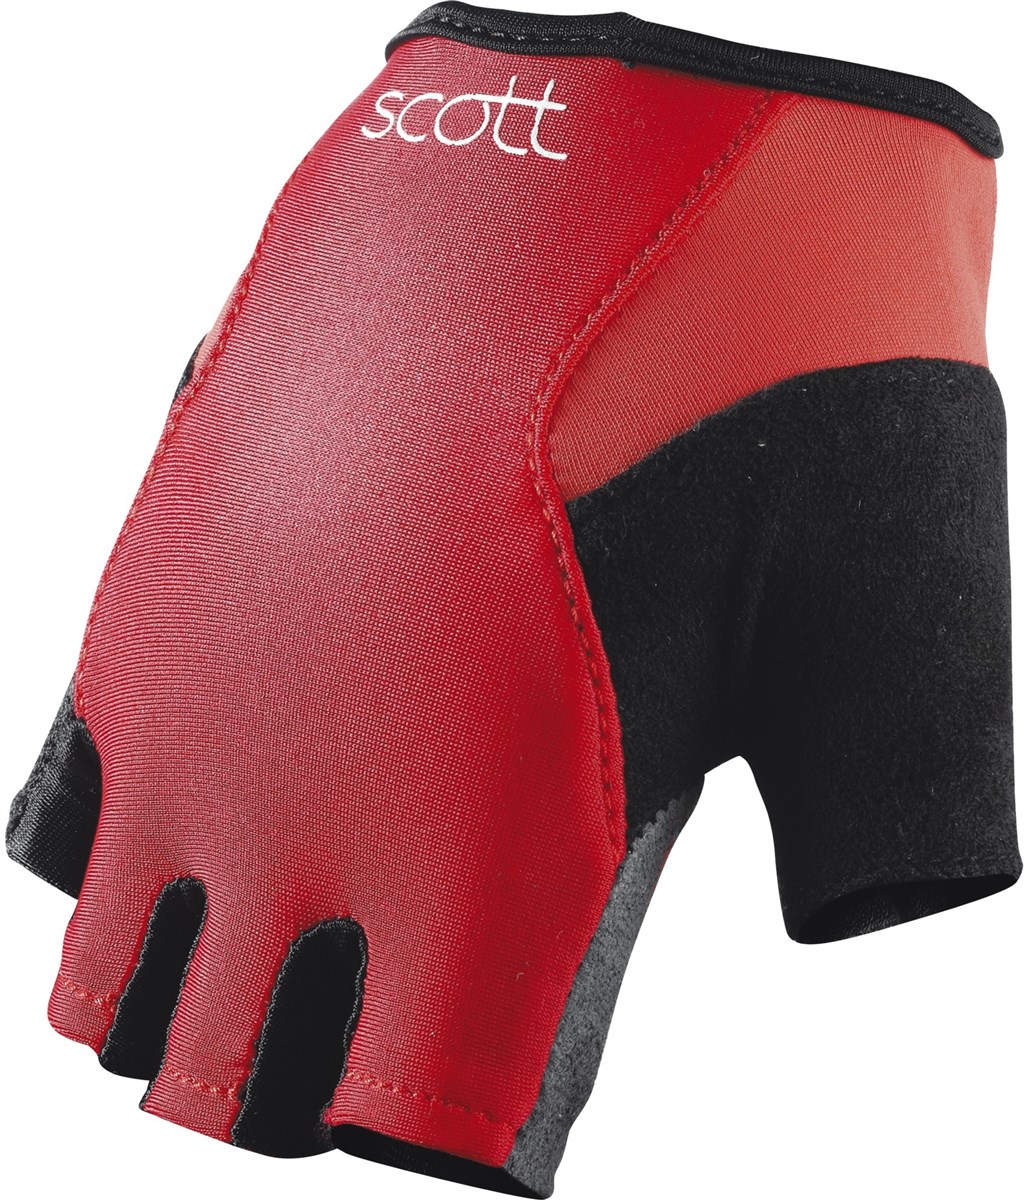 Scott Essential Womens Short Finger Cycling Gloves product image